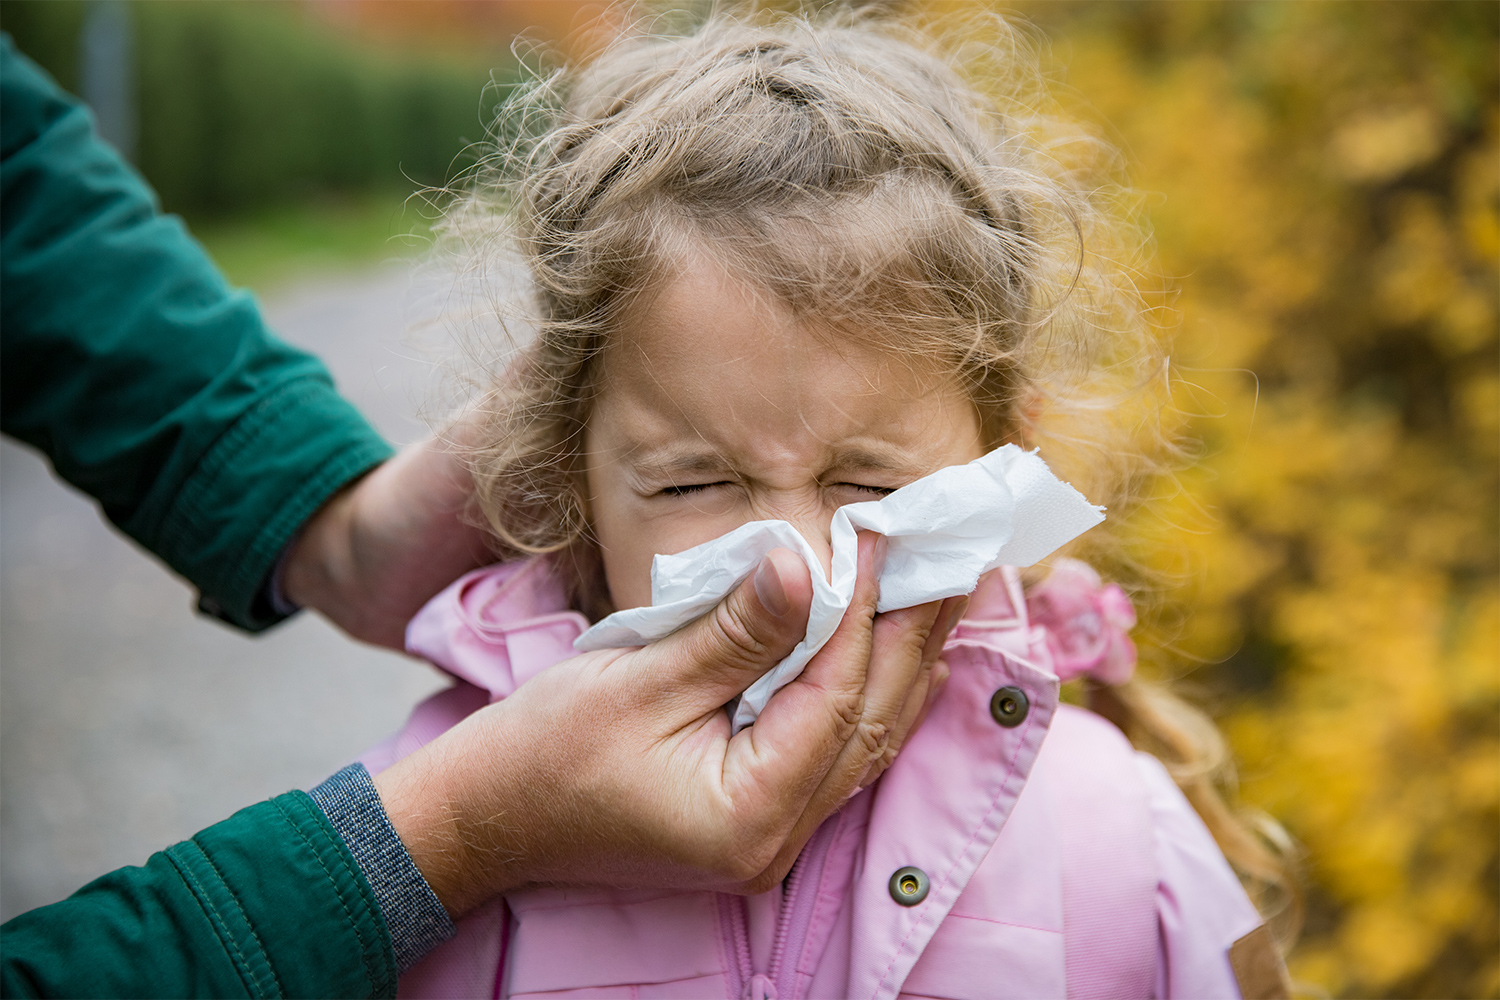 How To Treat Your Childs Seasonal Allergies According To Our